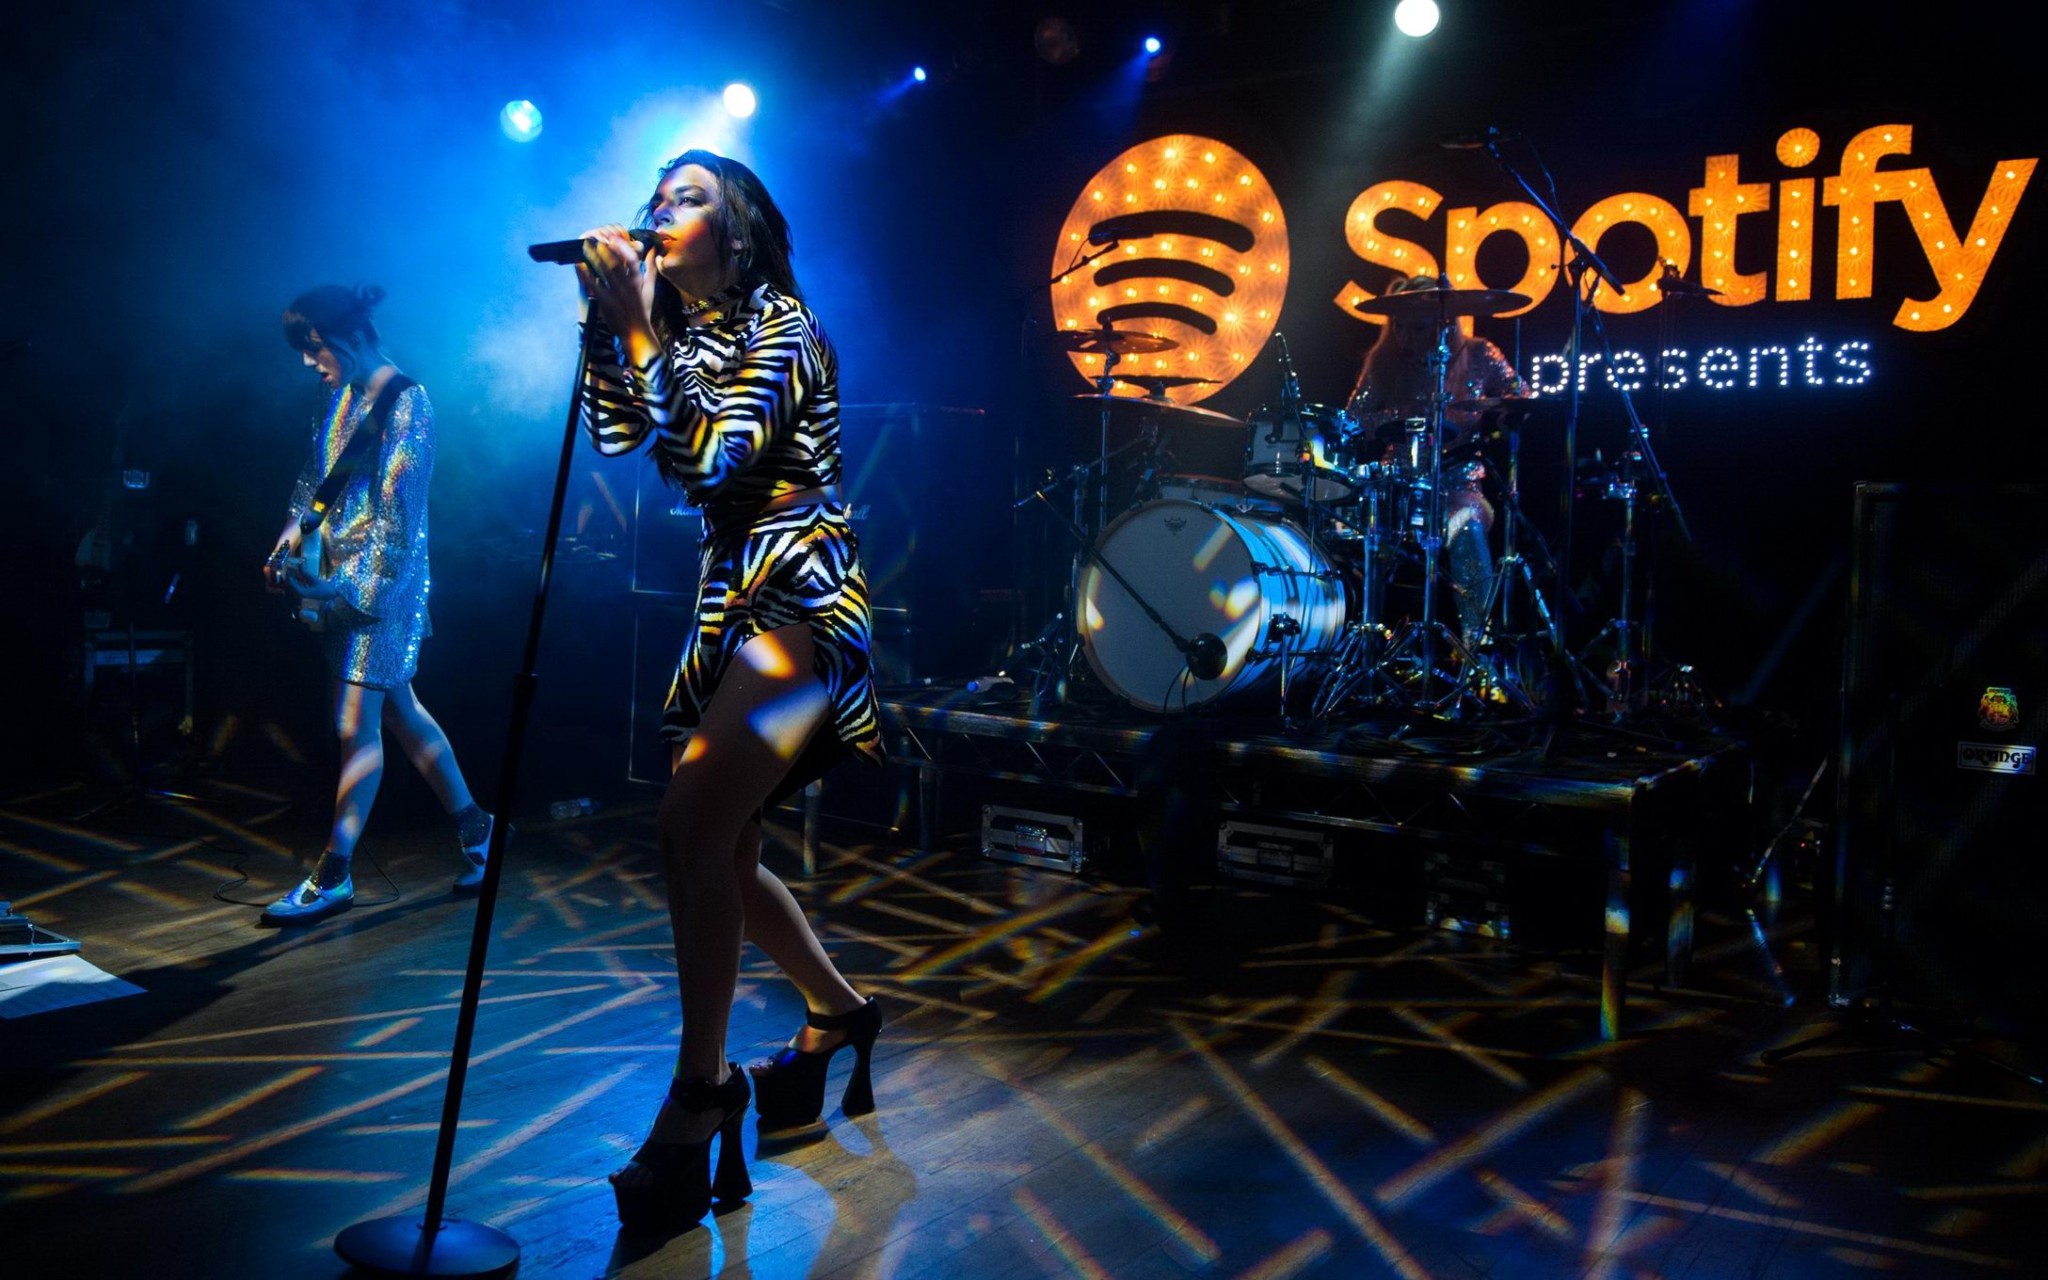 Charli XCX upskirt at the Spotify Opening Gig in London #75169030